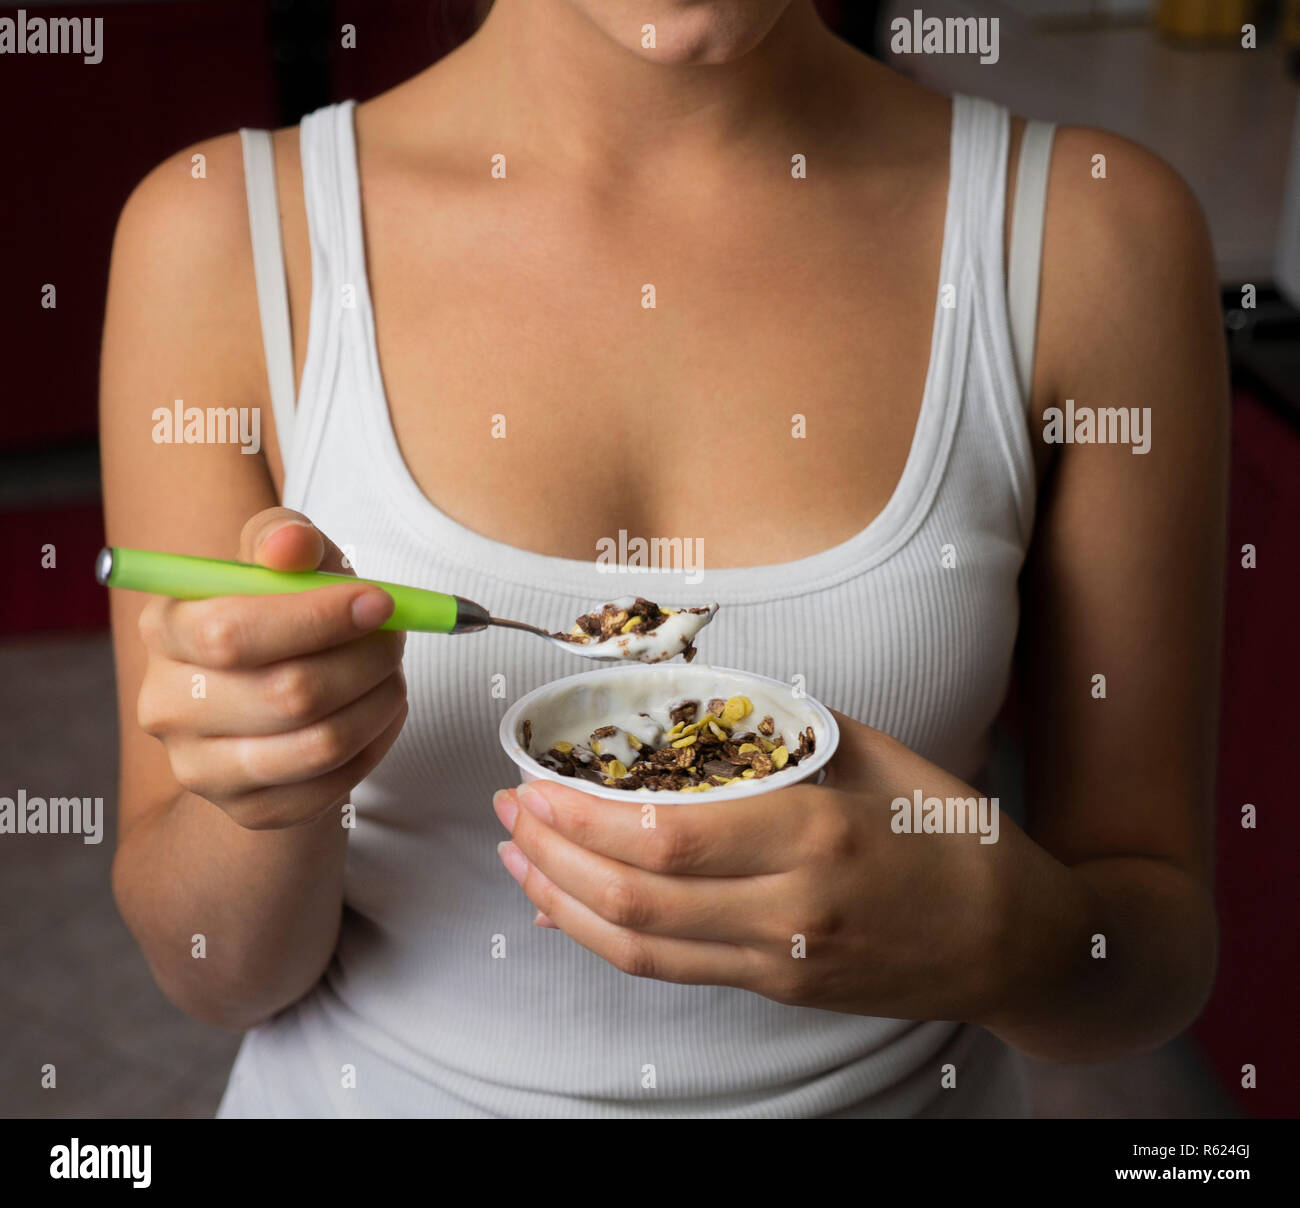 young woman eating yogurt with cornflakes Stock Photo